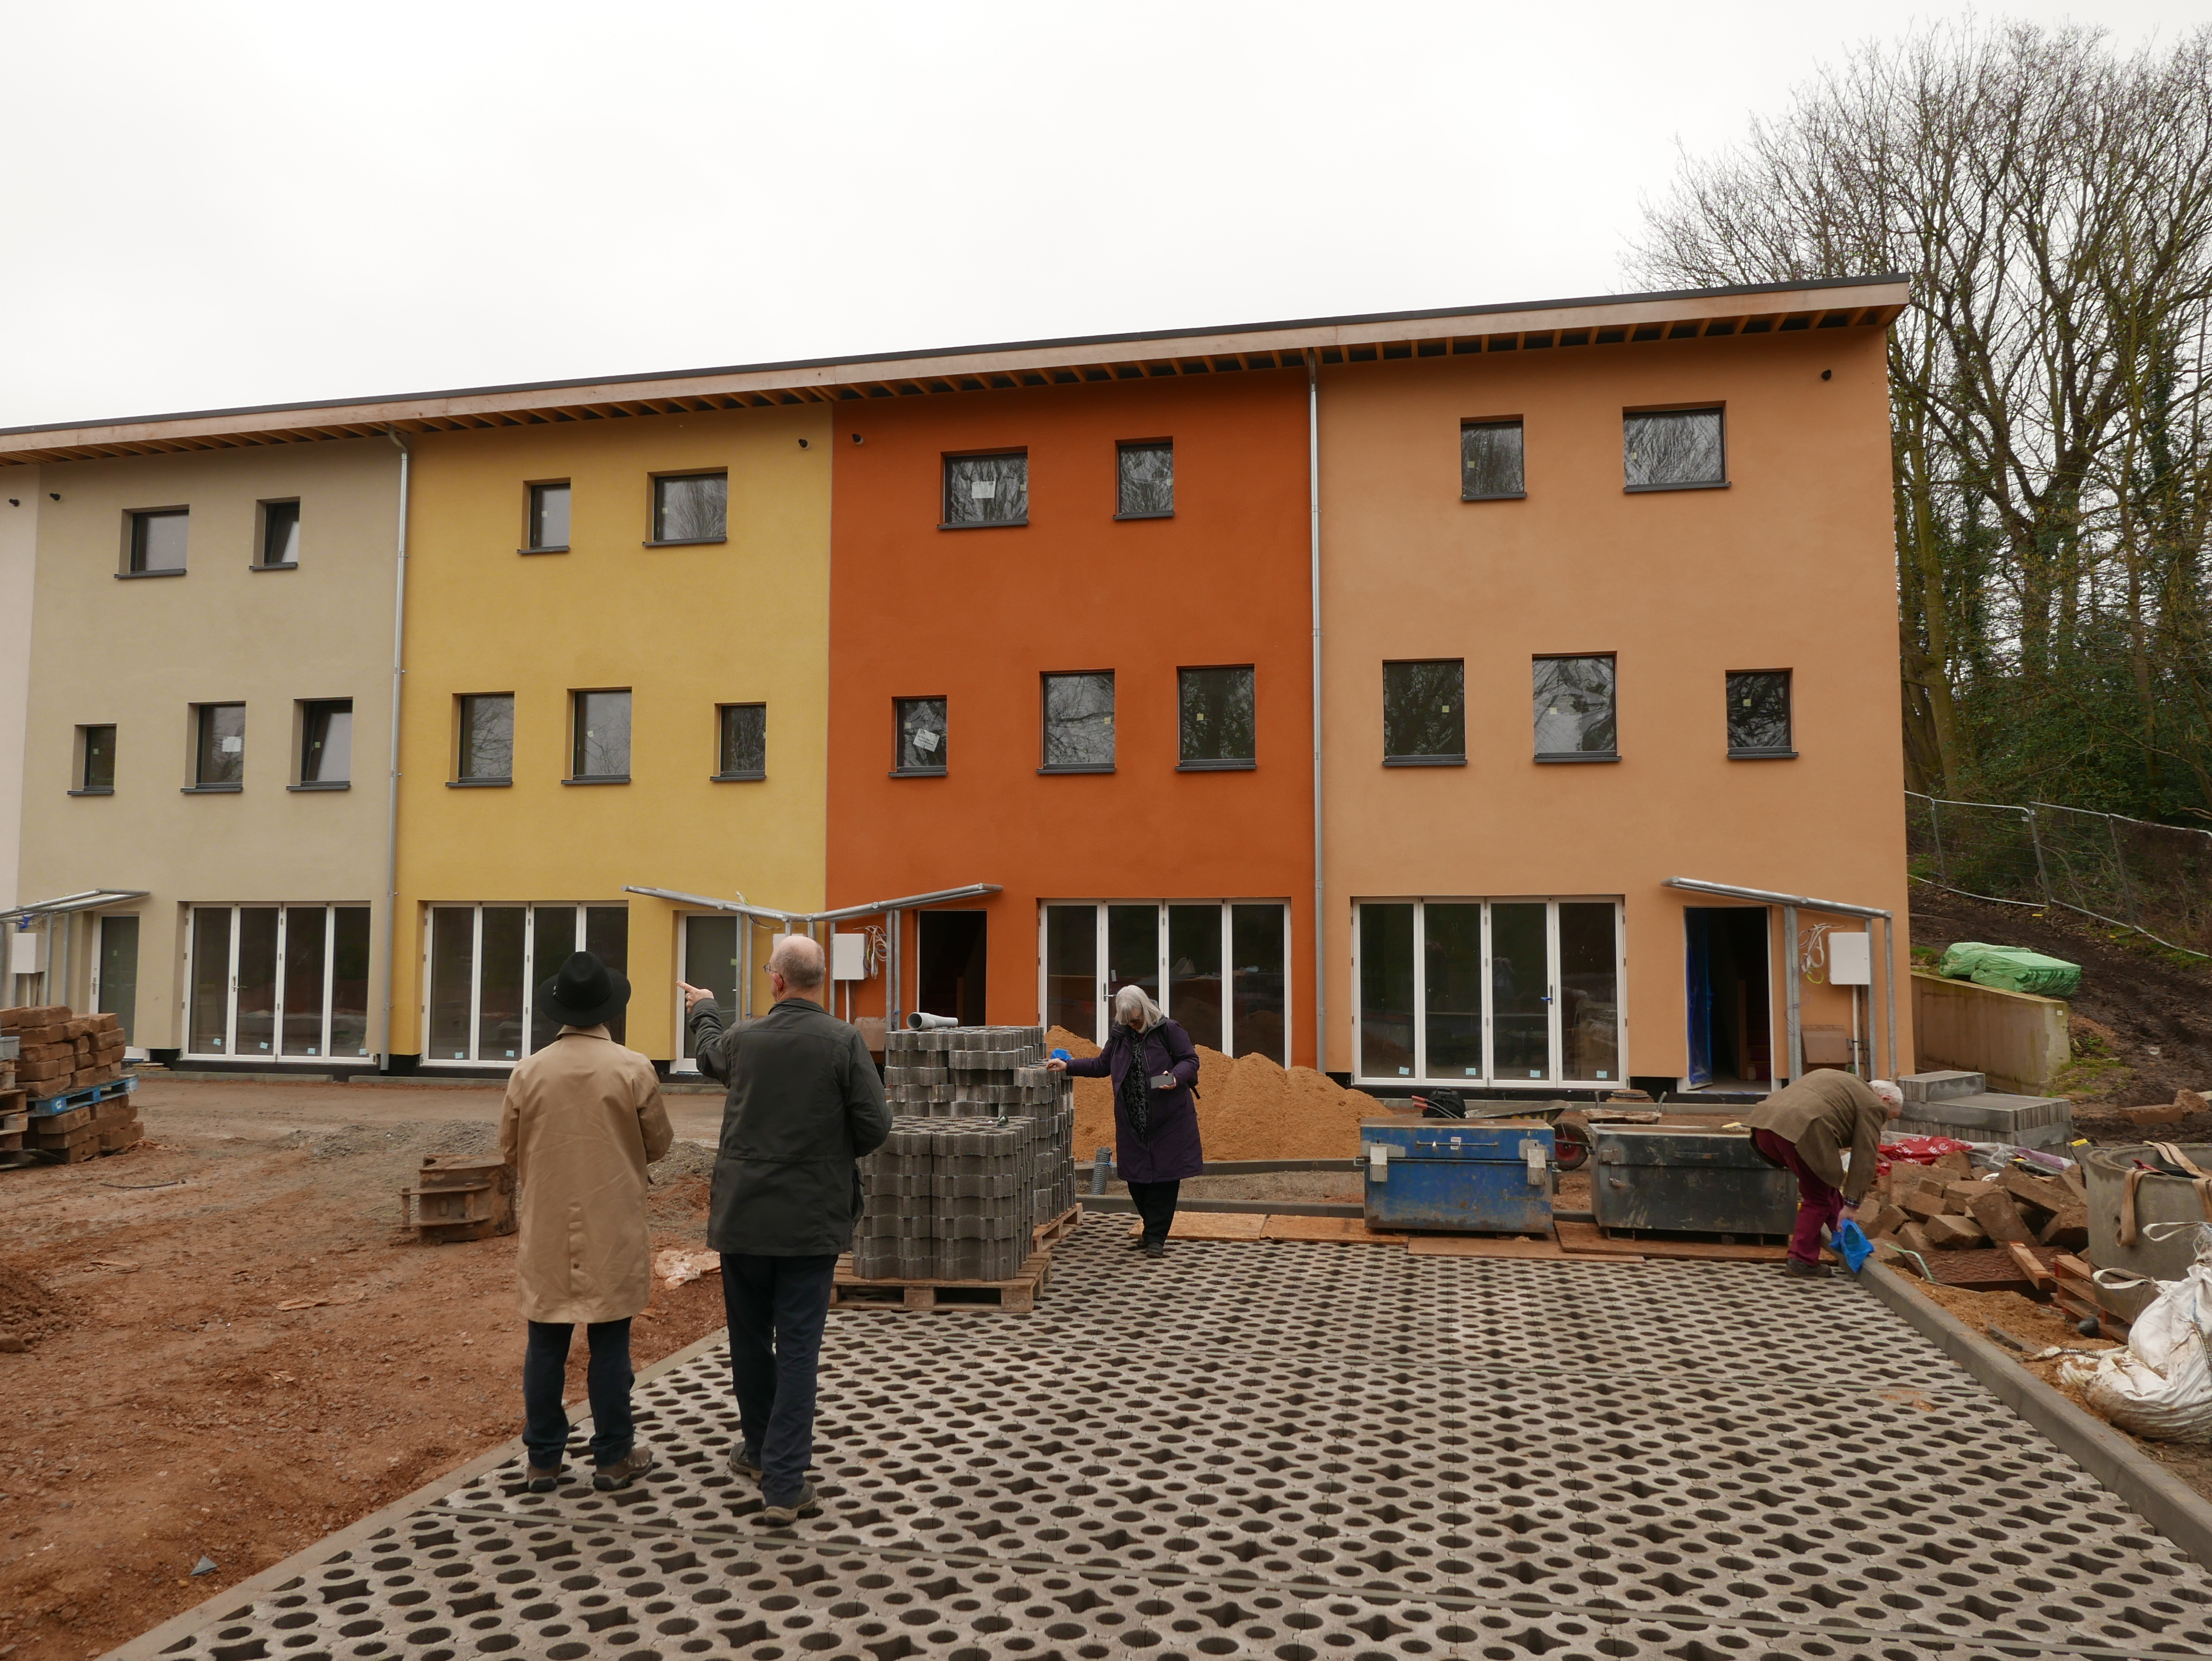 Cannock Mill Co-housing project – rendering a community @lime_products